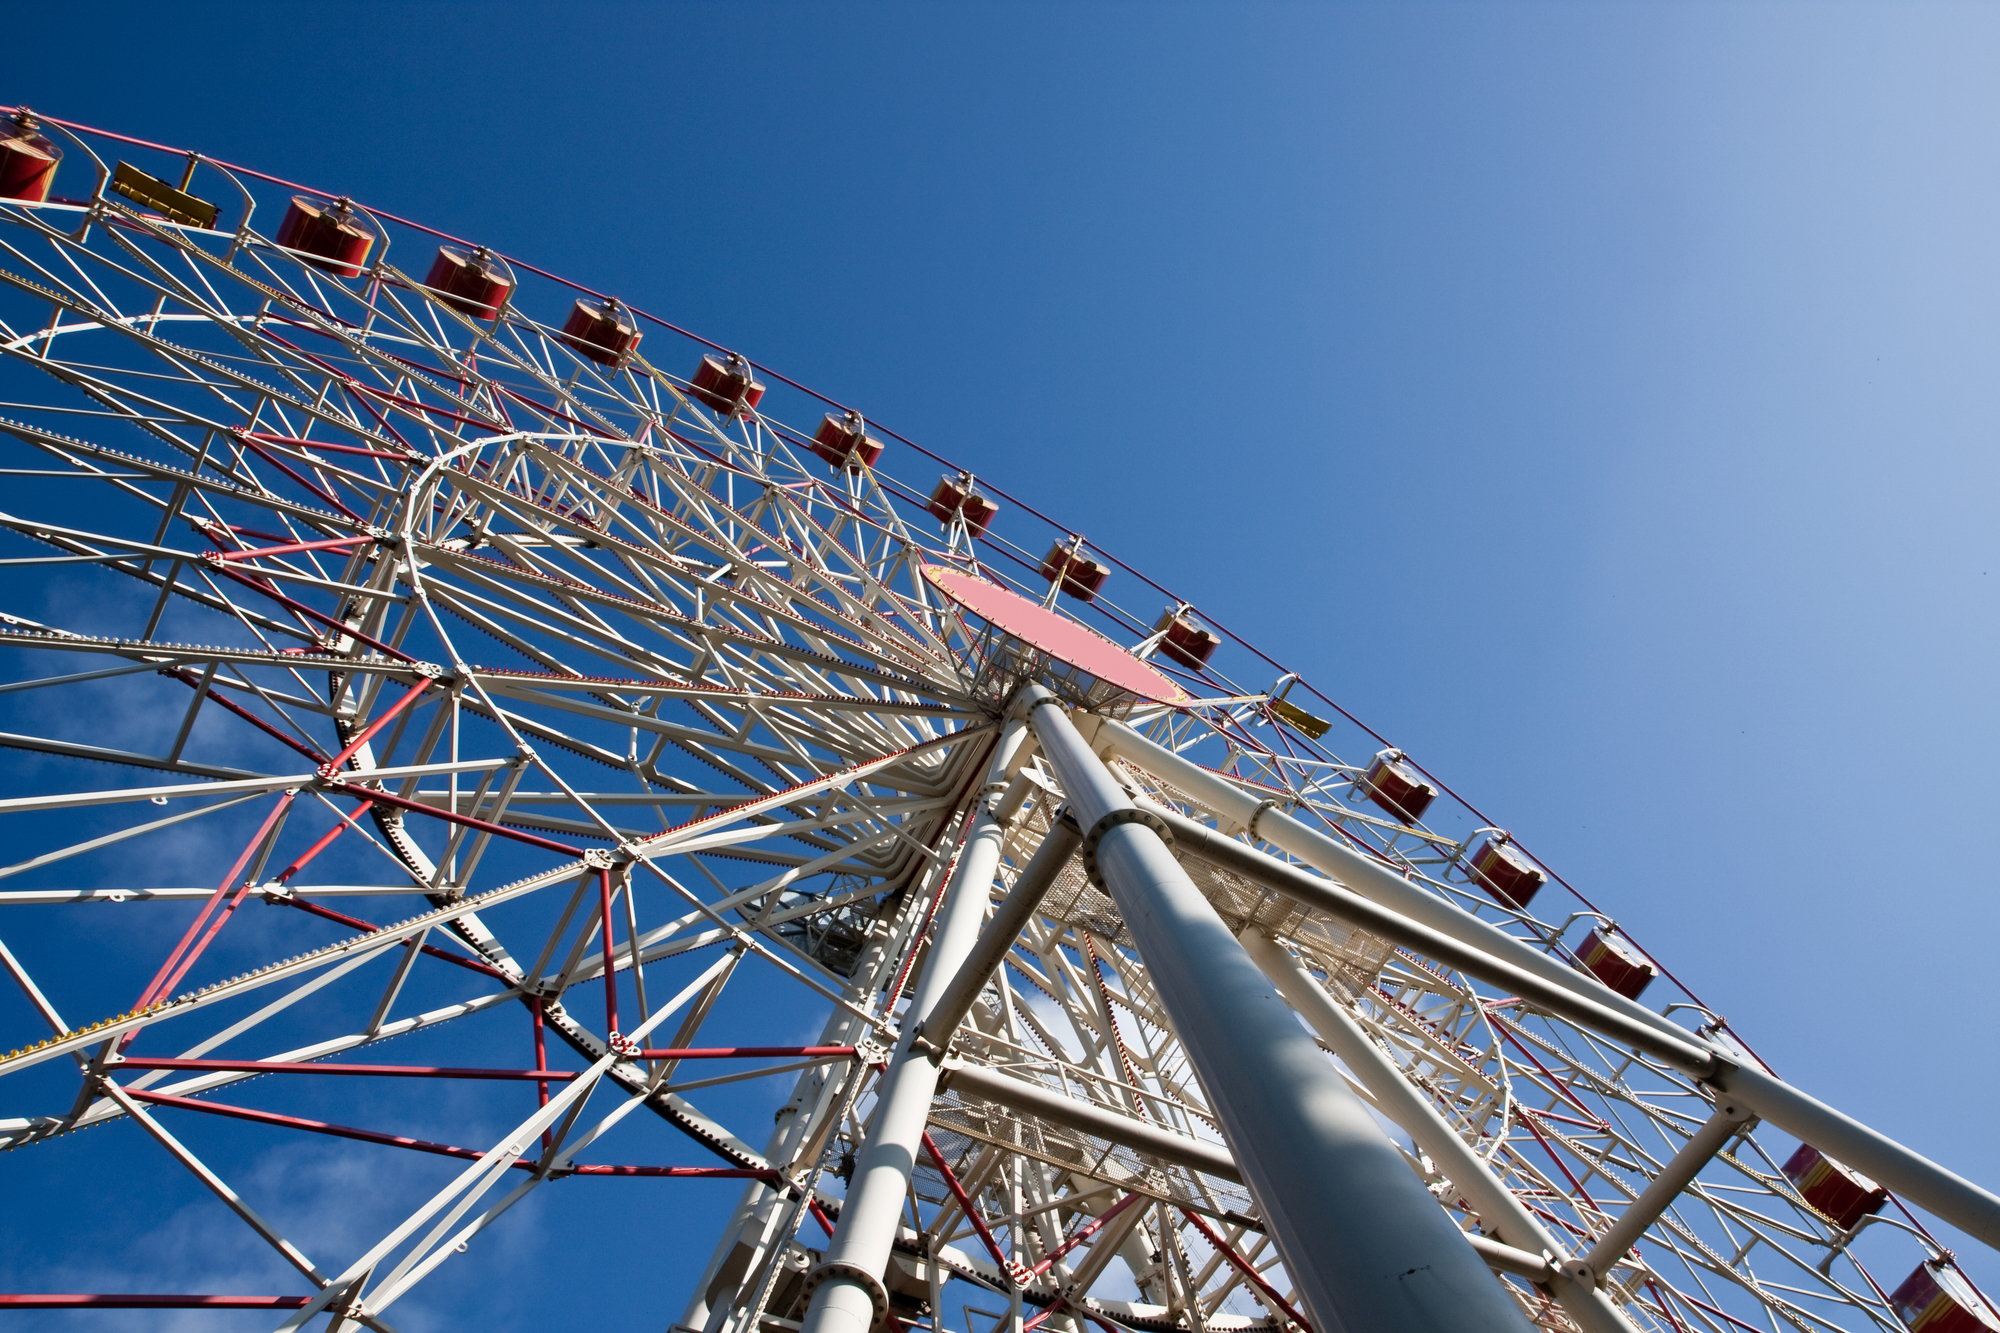 Ferris Wheel Day | Days Of The Year